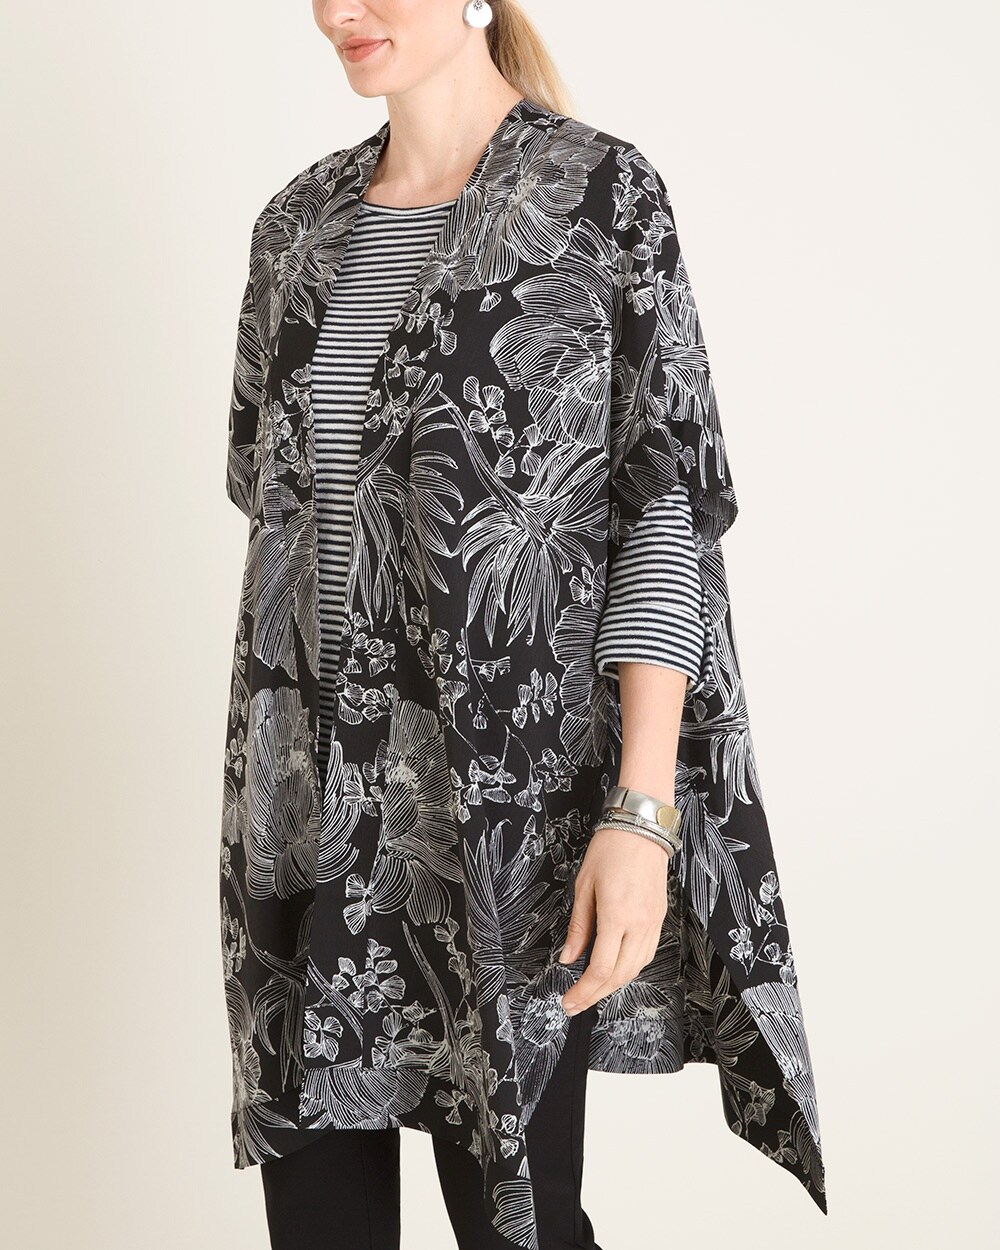 Black and White Floral Ruana Wrap